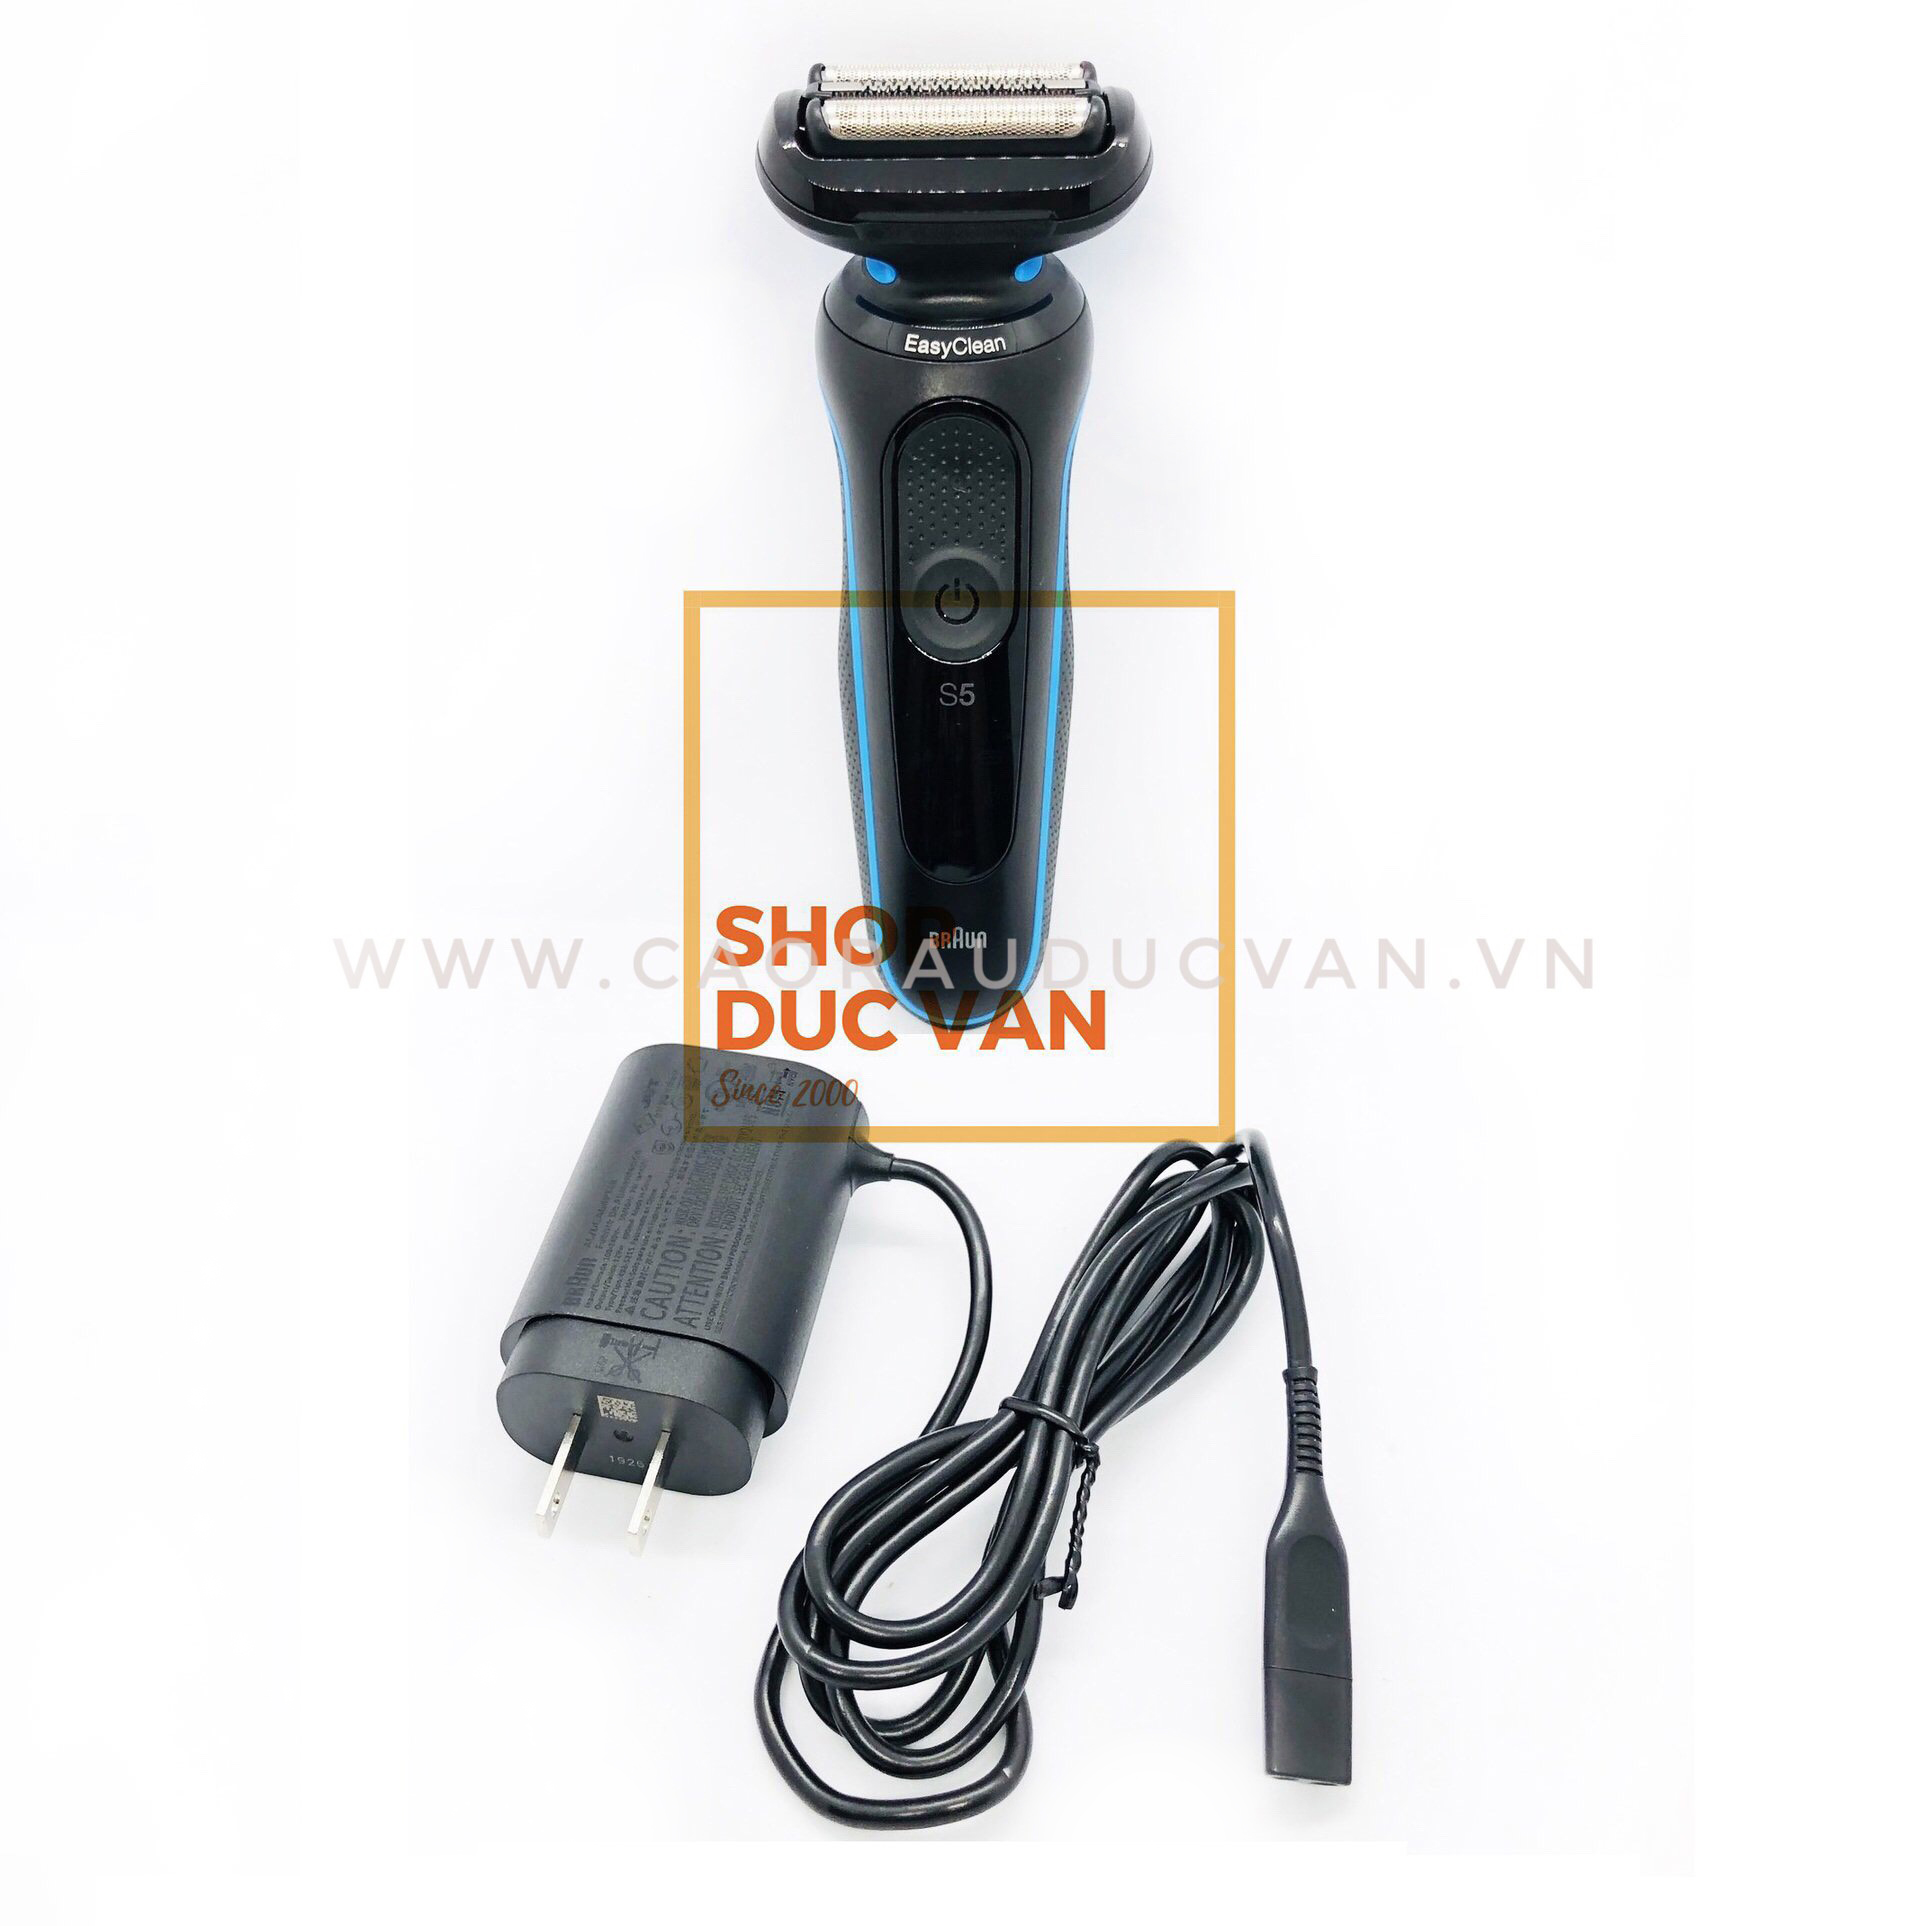 AC Charger Cord for Braun Shaver Series 5 Charger for Braun Electric Razor